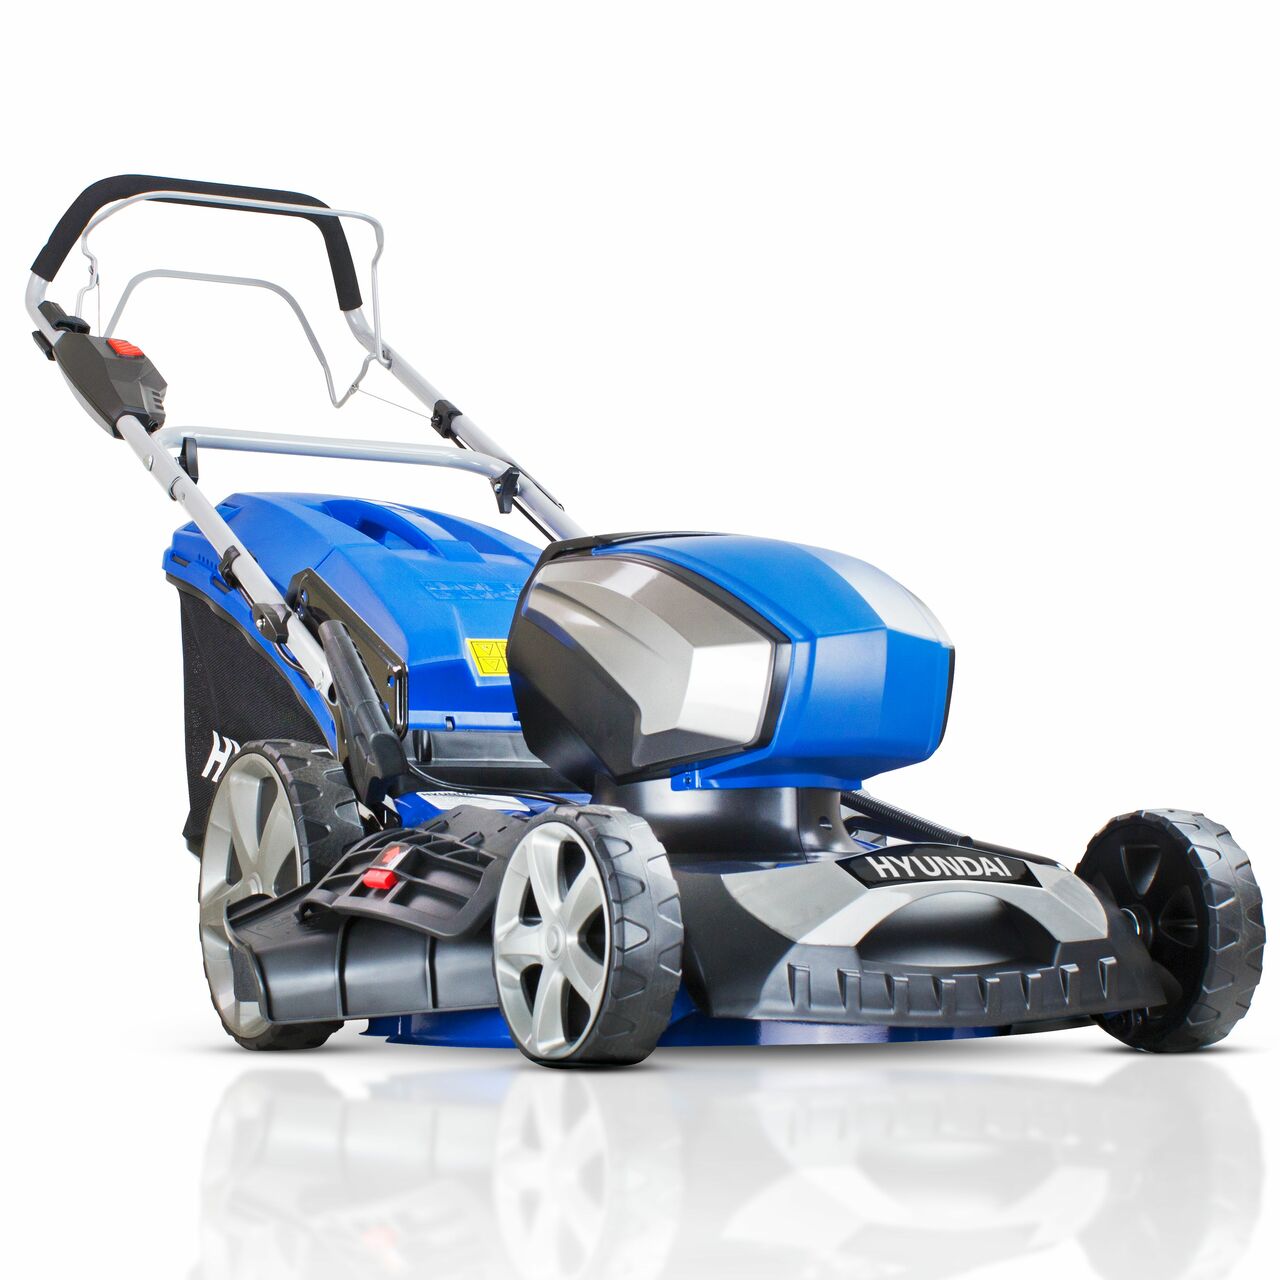 Hyundai-HYM80Li460SP-18"/45cm-Cordless-80v-Lithium-Ion-Battery-Self-Propelled-Lawnmower-with-Battery-&-Charger